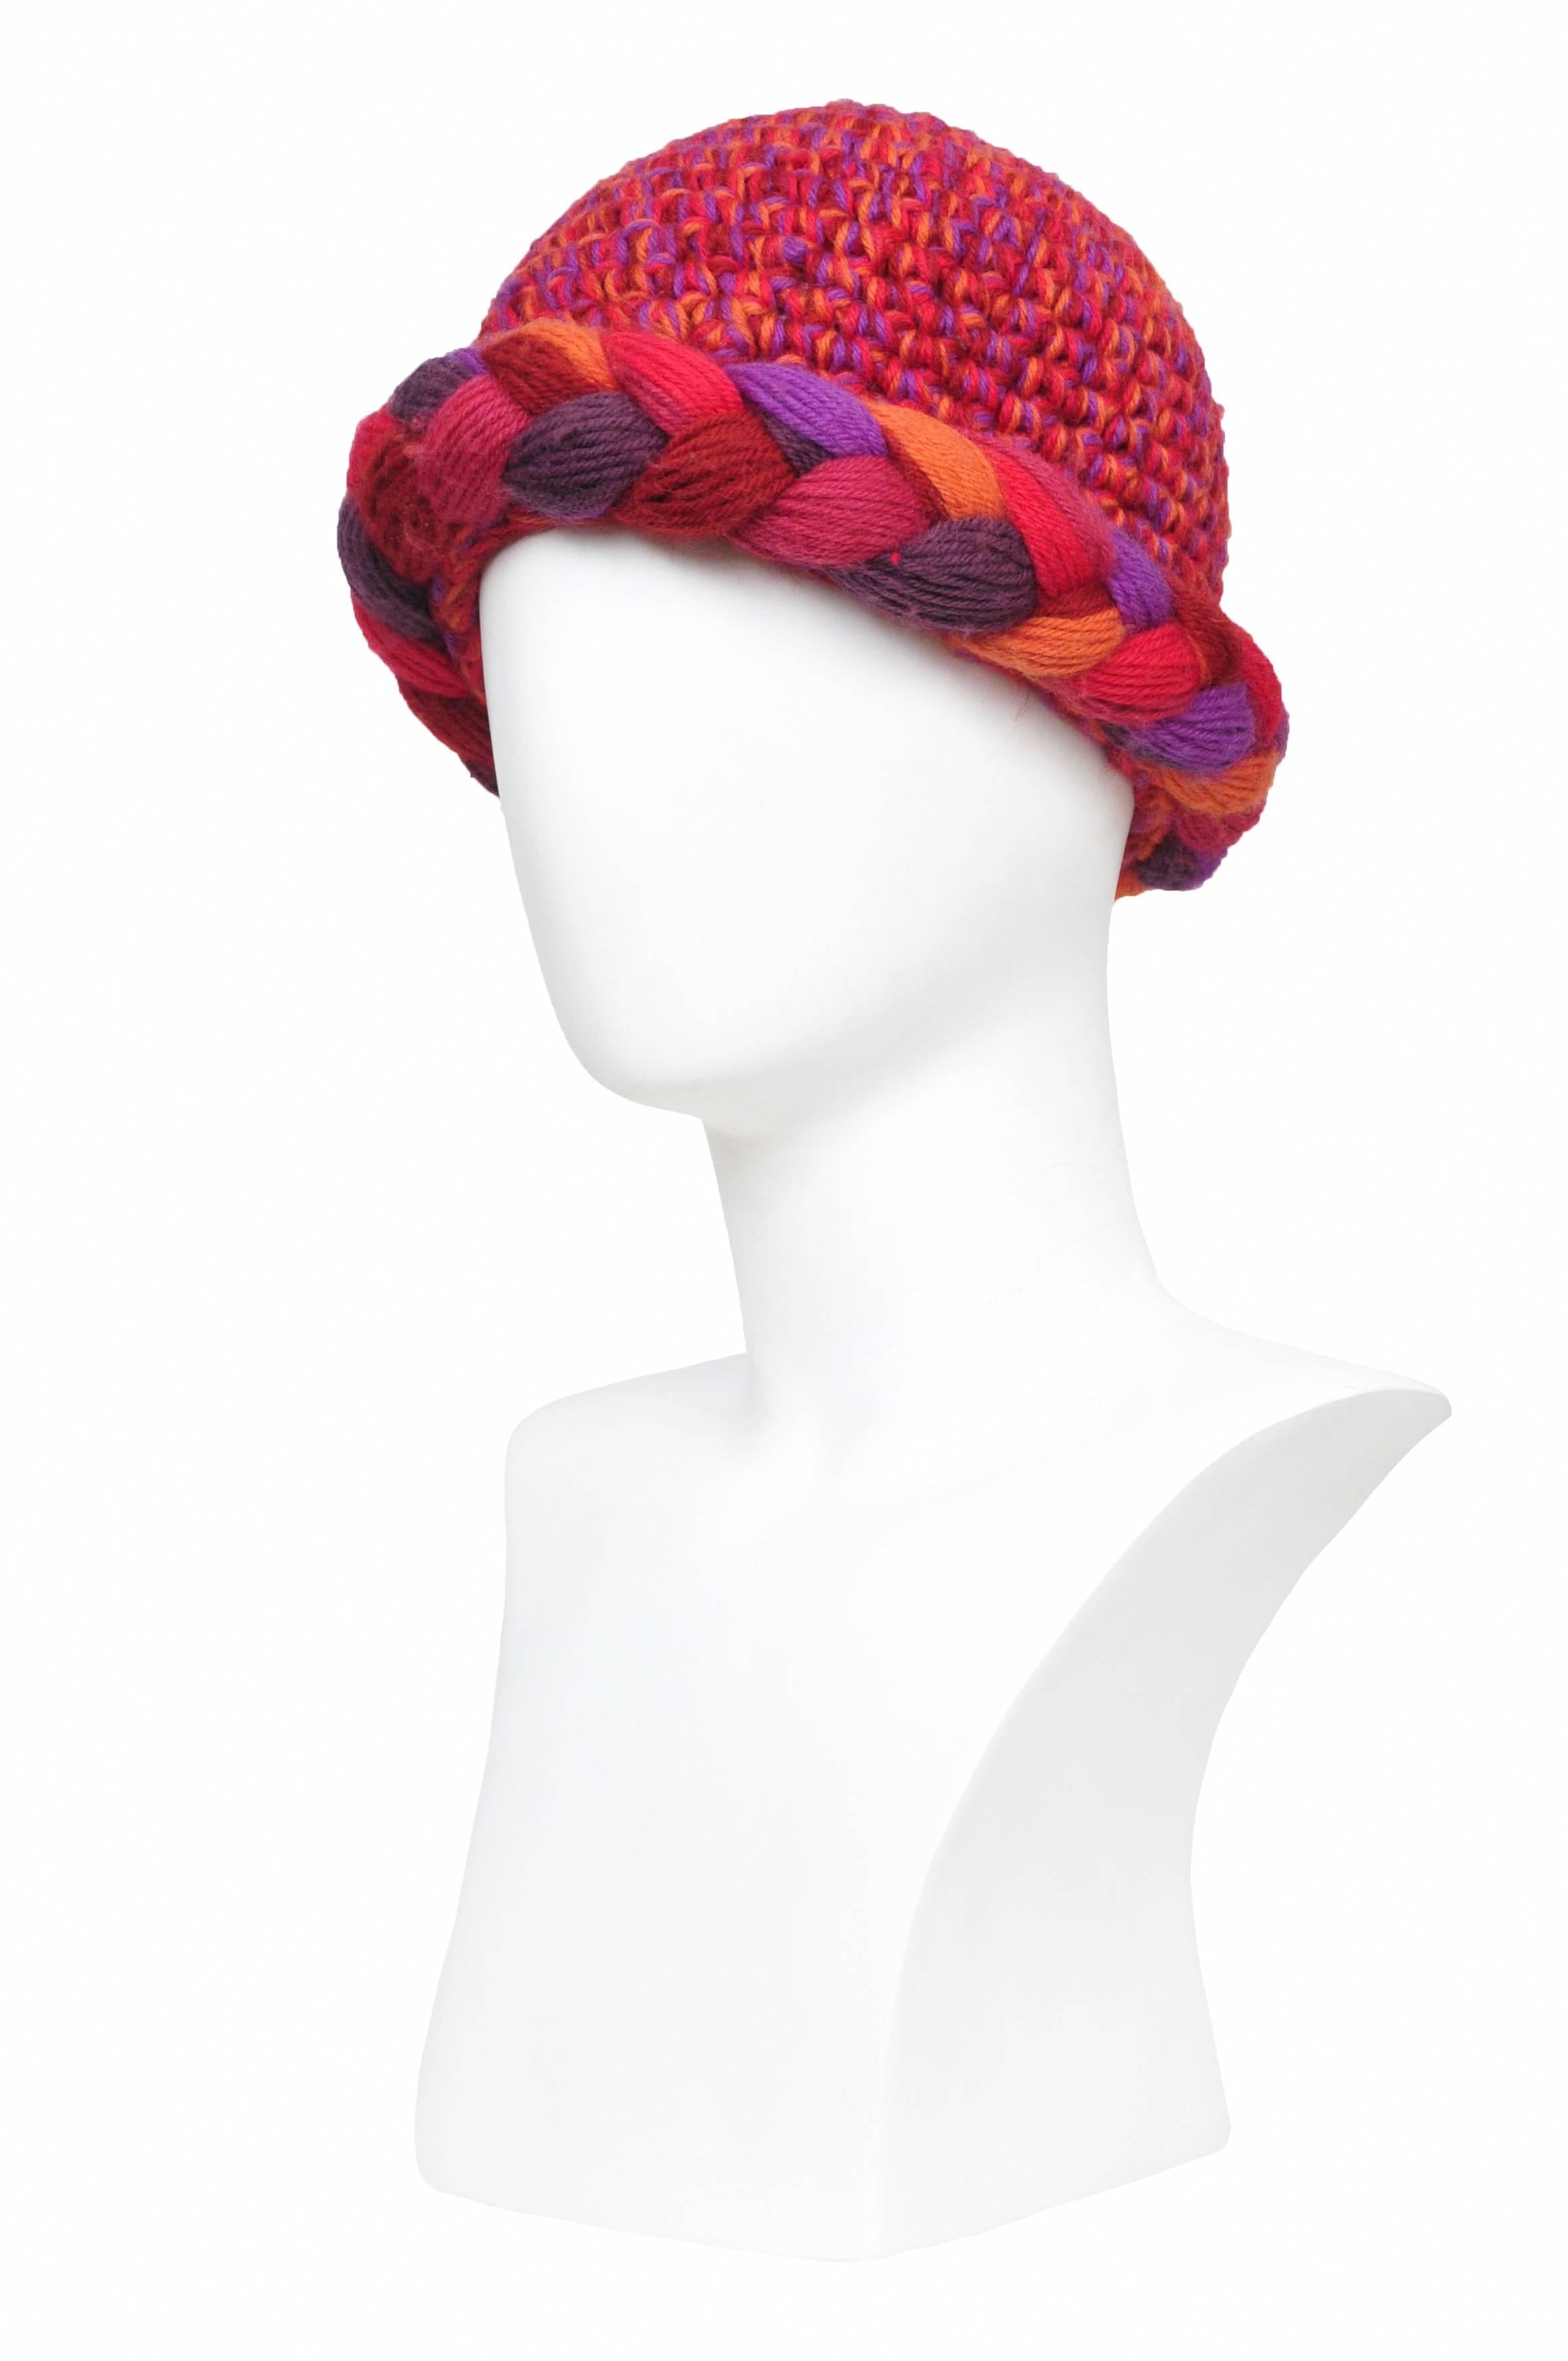 Vintage Yves Saint Laurent knit hat featuring braided pink, red and purple yarn around the edge.